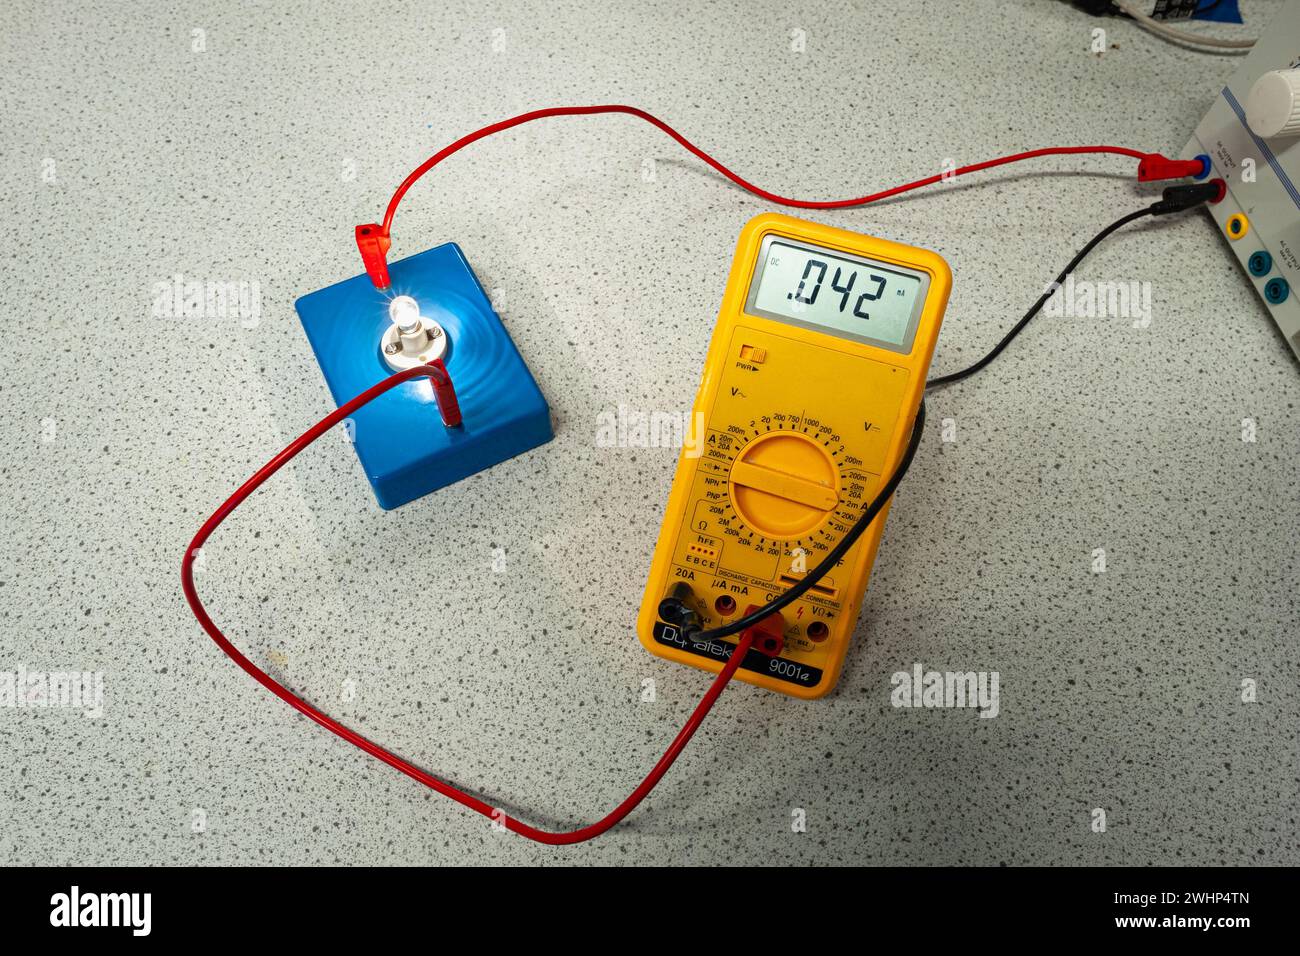 Measuring the electrical current with a multimeter through a lit light bulb. Stock Photo